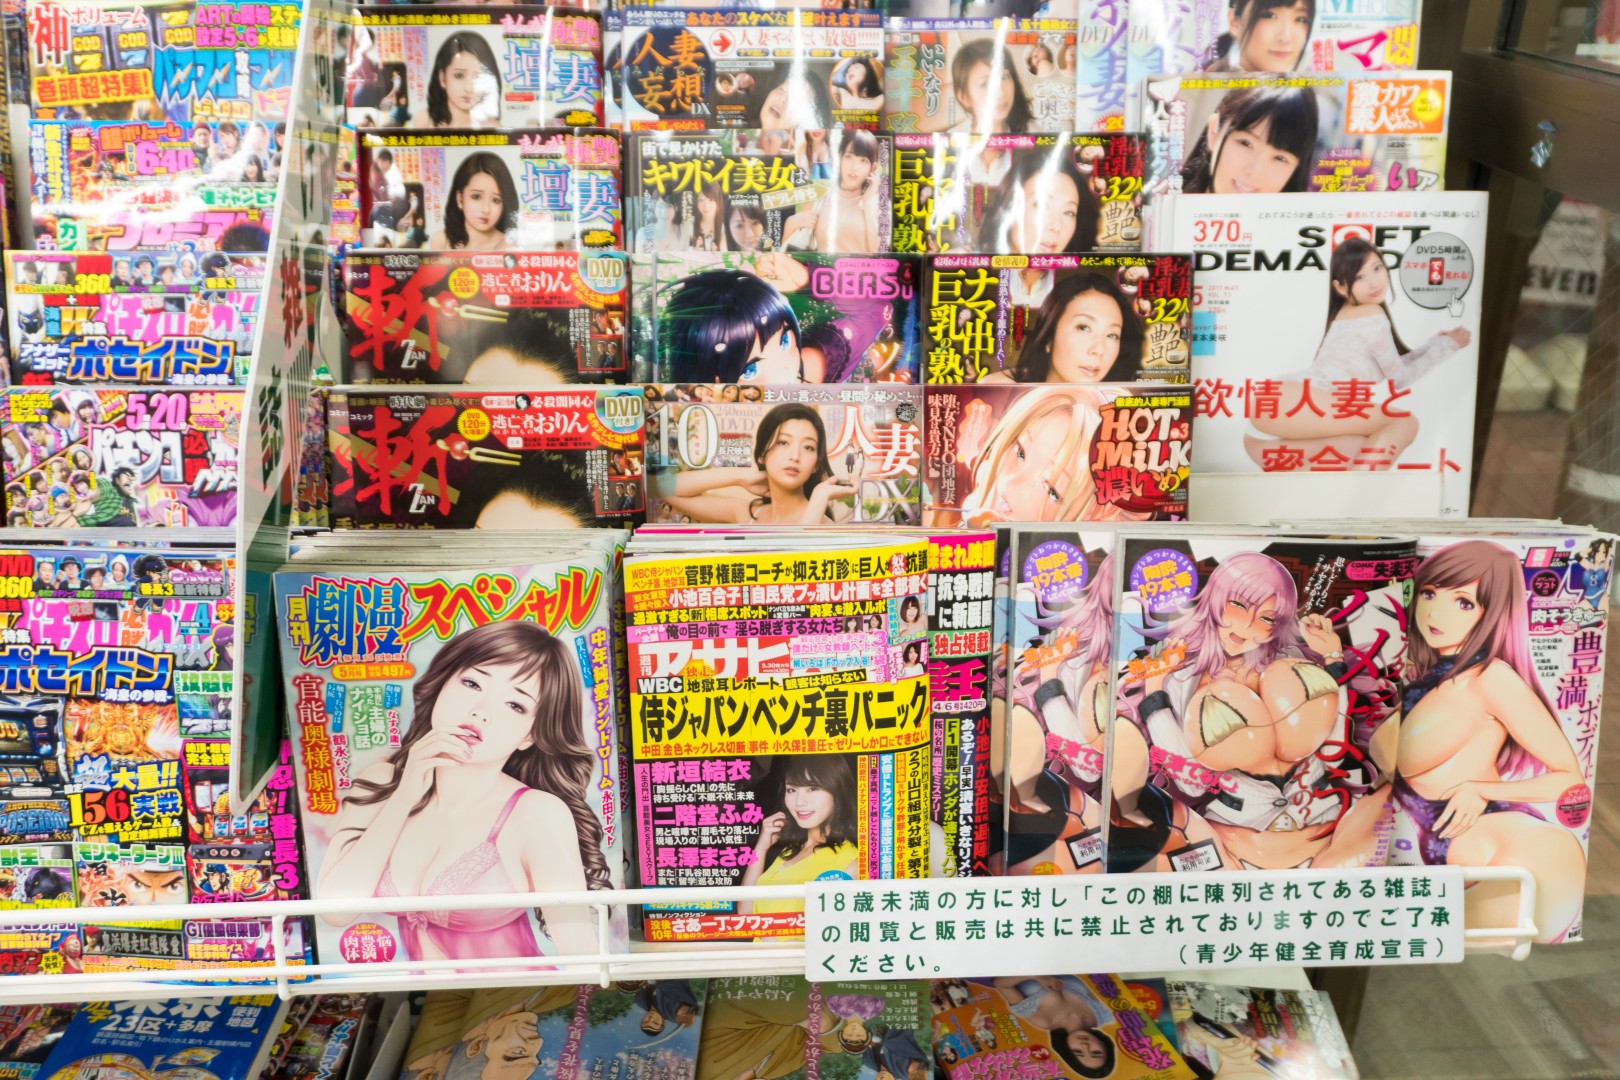 Porn free: Japan to take adult magazines off convenience ...